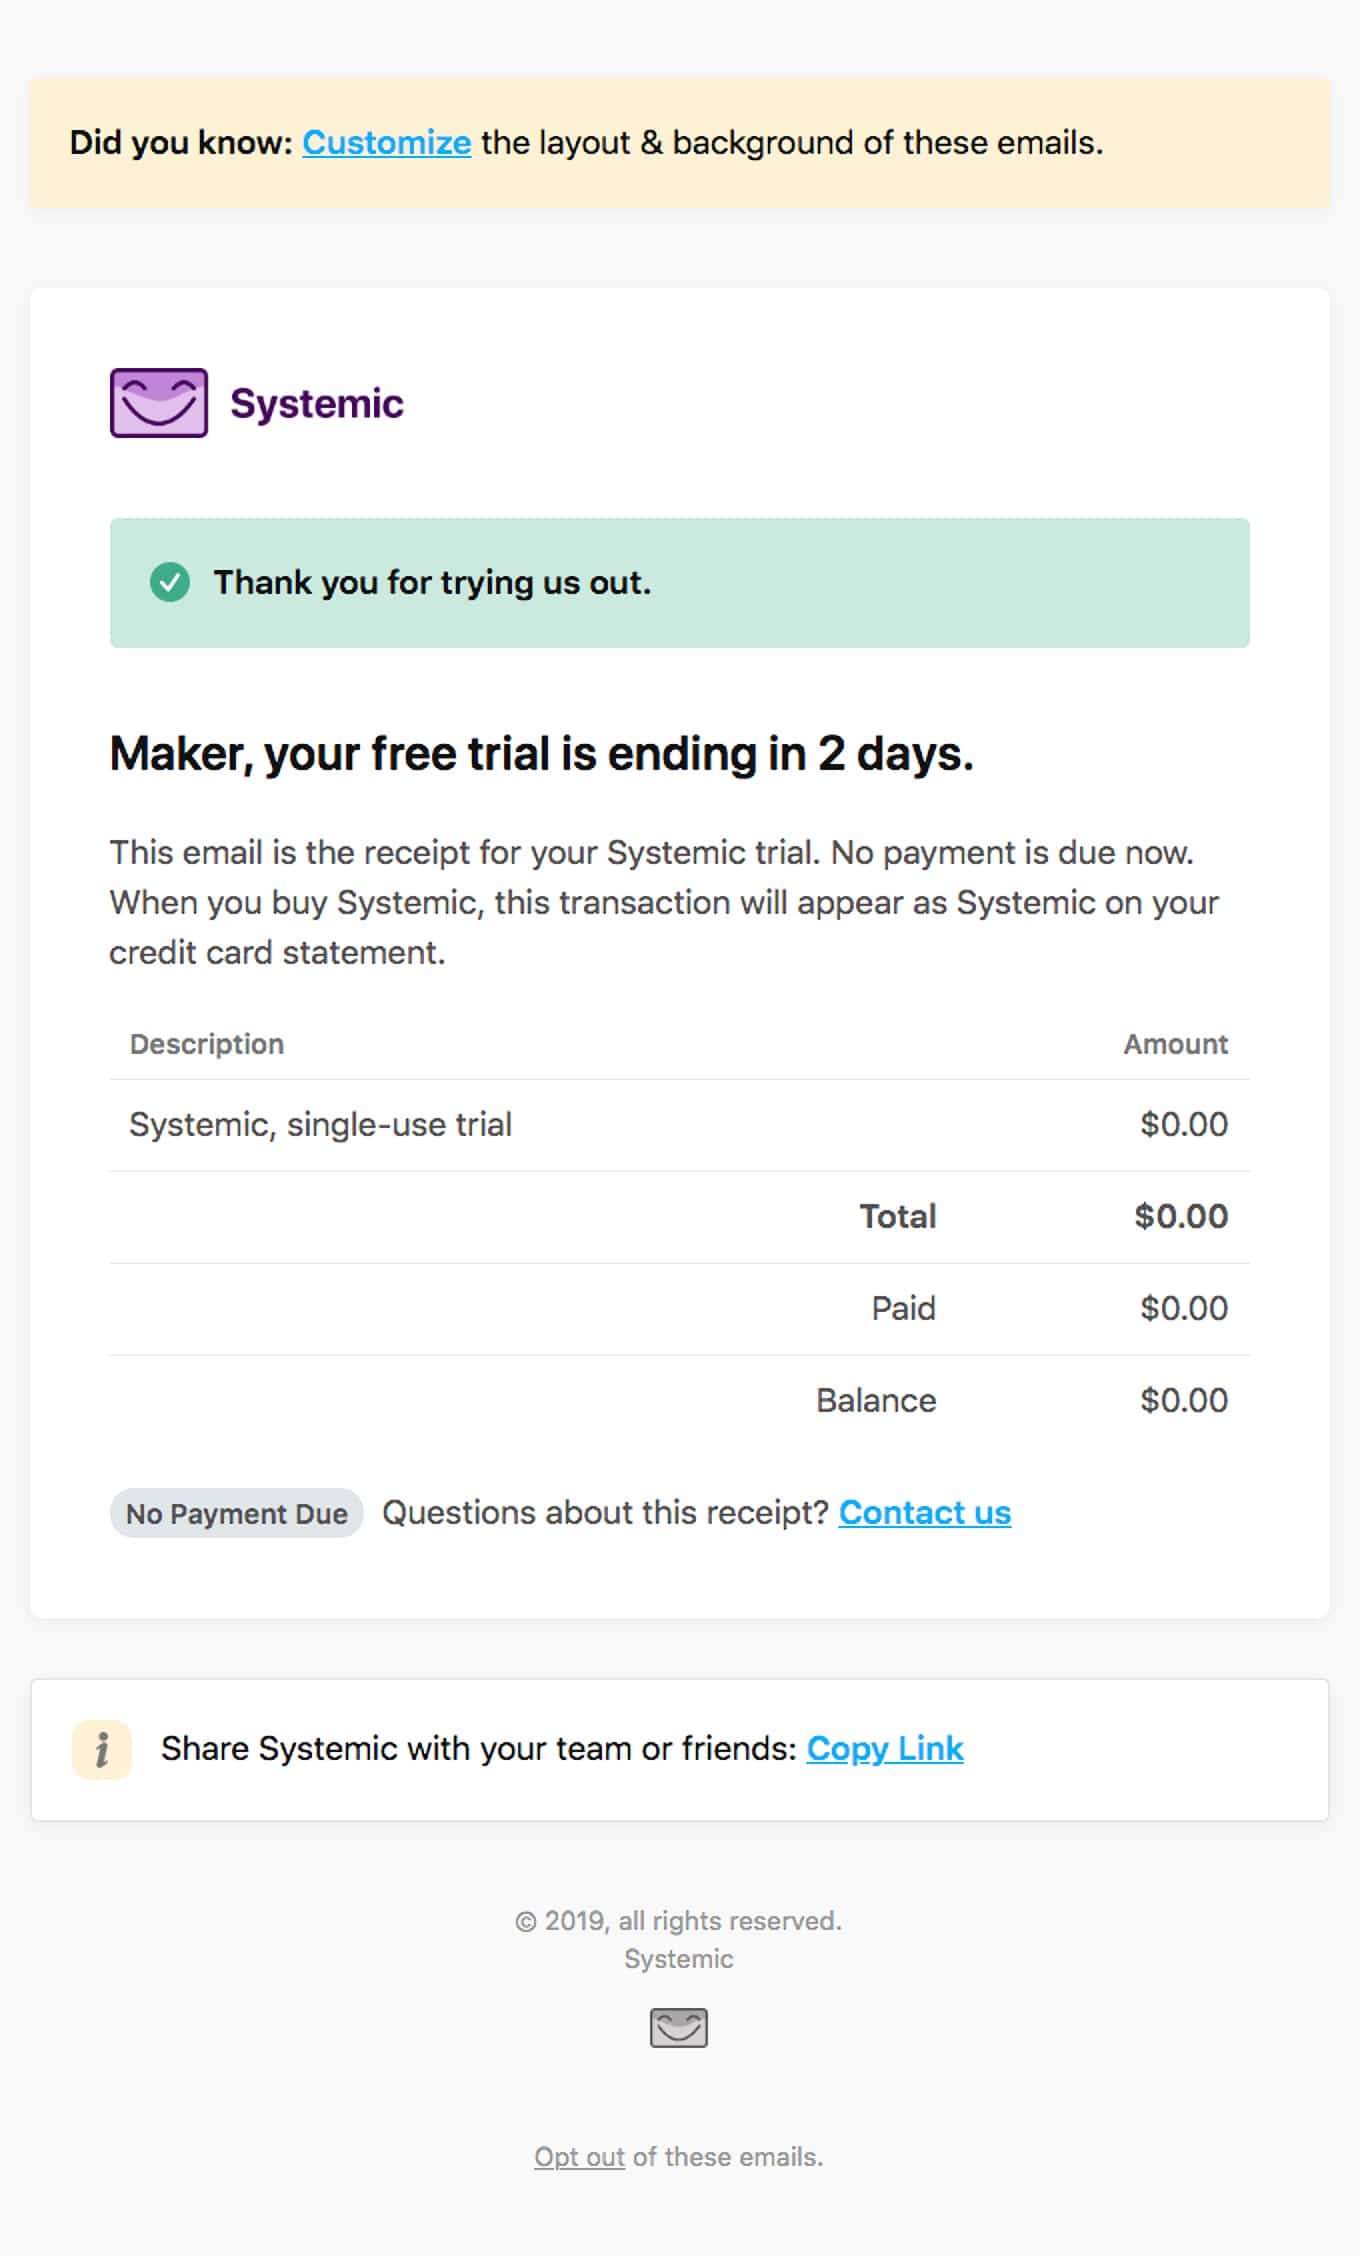 Systemic free trial up reminder